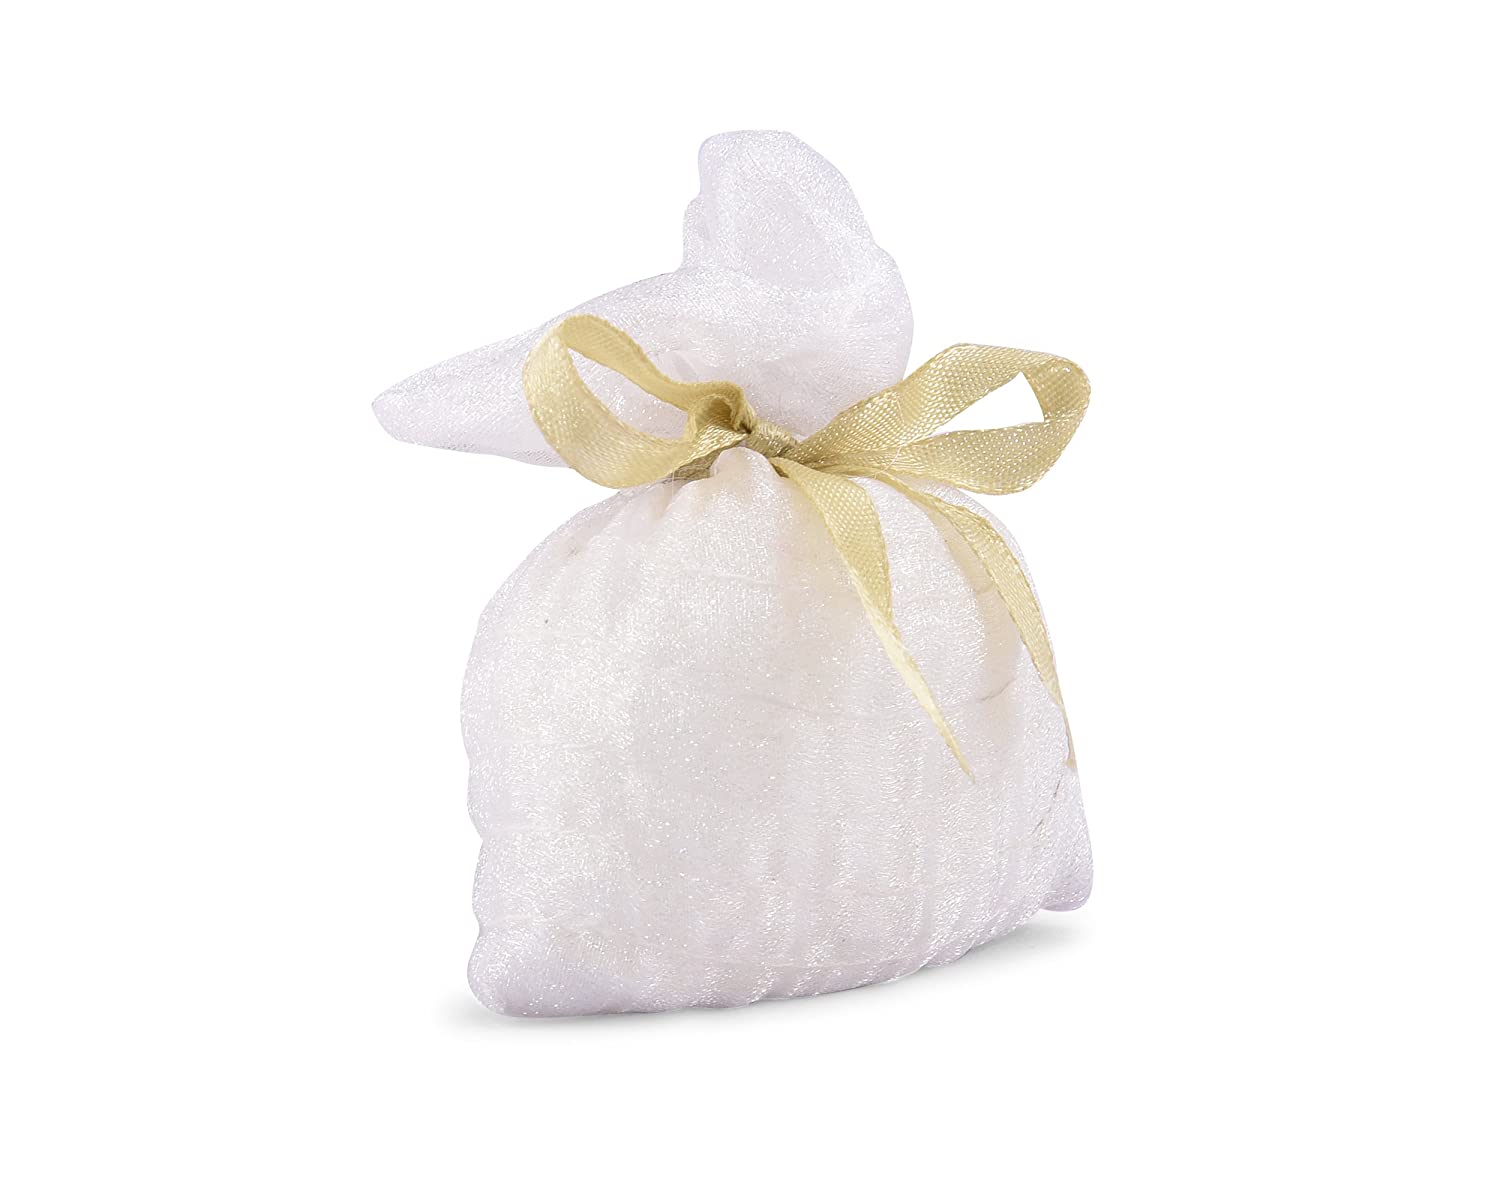 Scented Sack White Mulberry